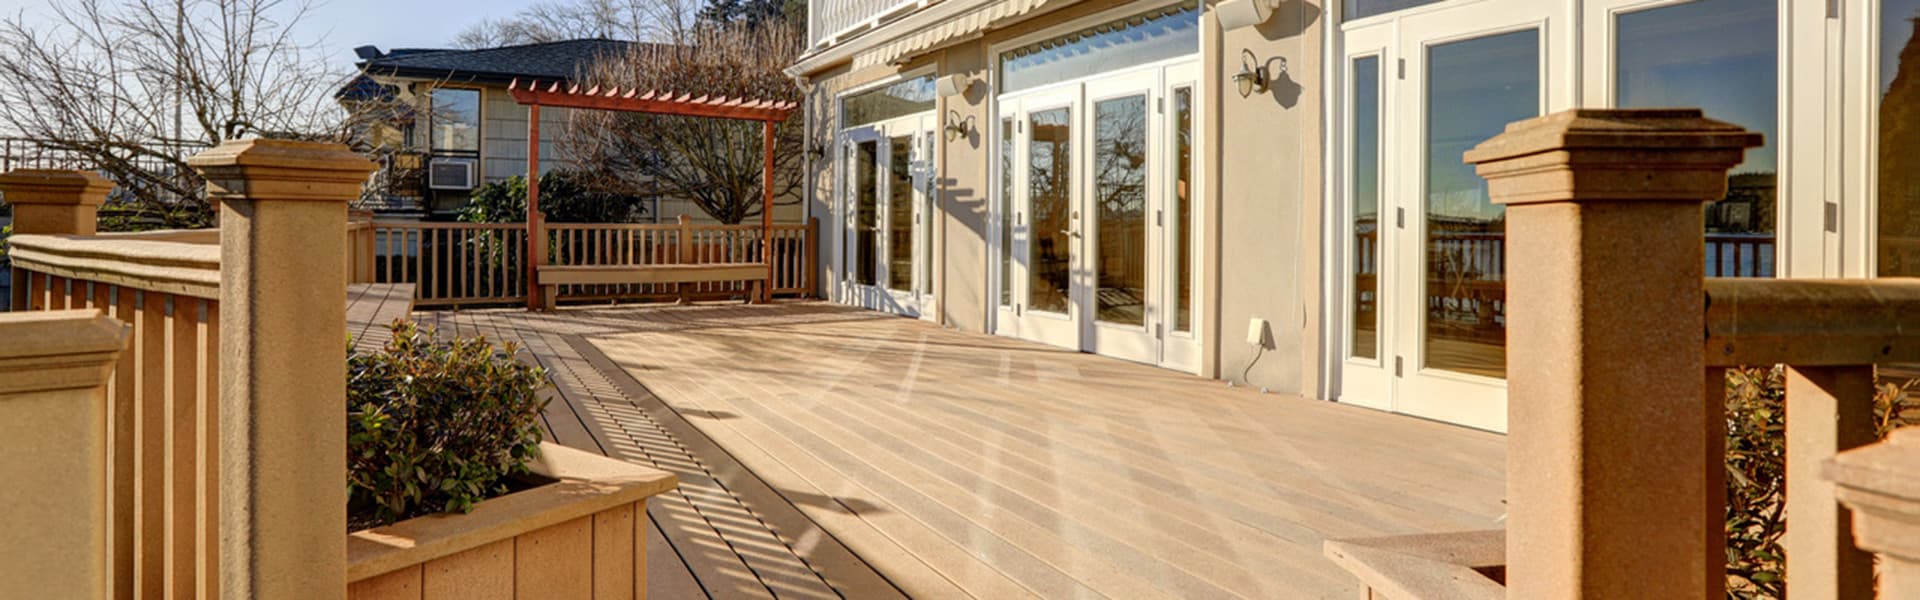 A wide view of a home deck in the morning light